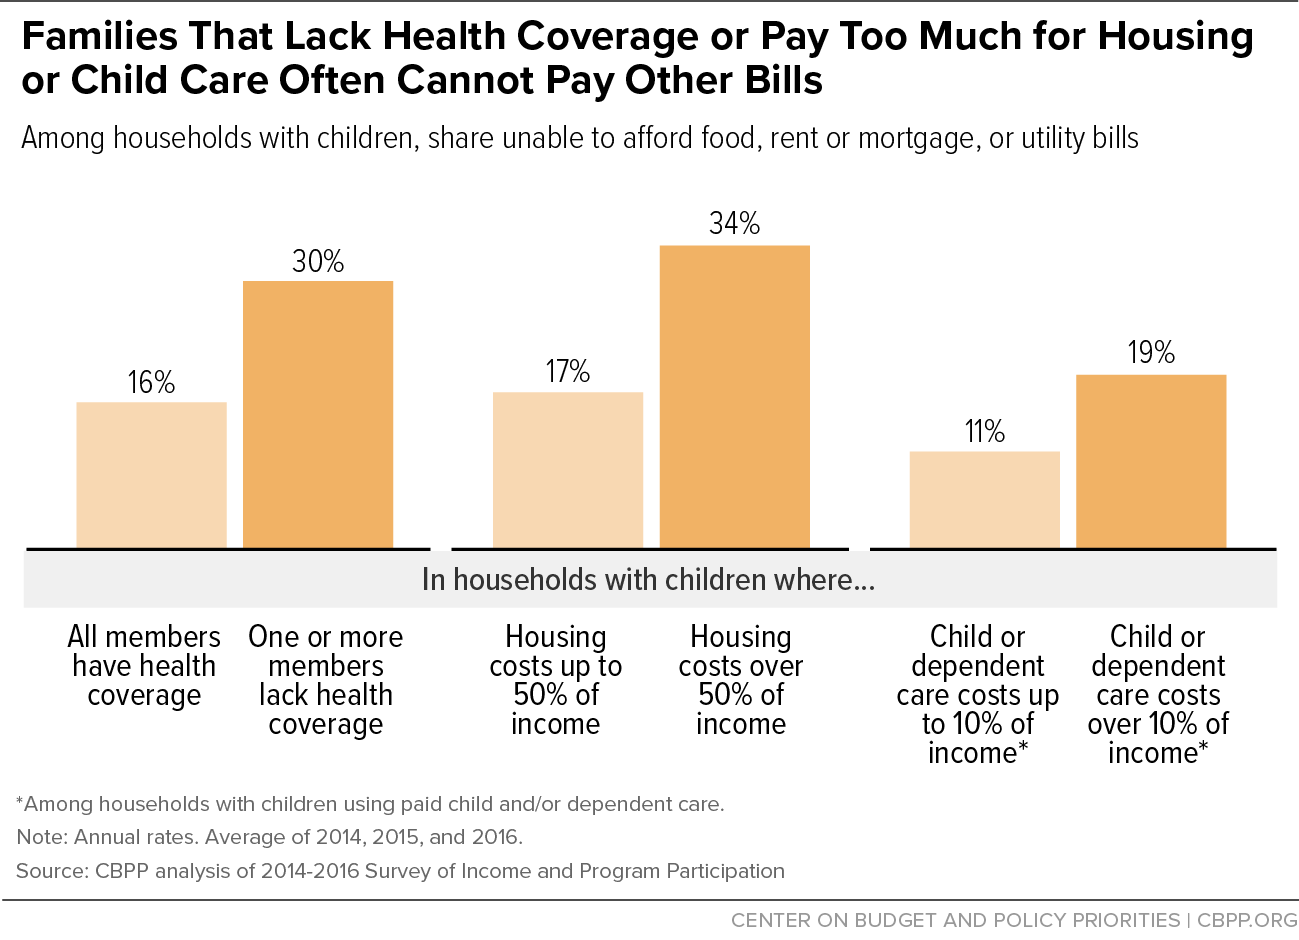 Families That Lack Health Coverage or Pay Too Much for Housing or Child Care Often Cannot Pay Other Bills